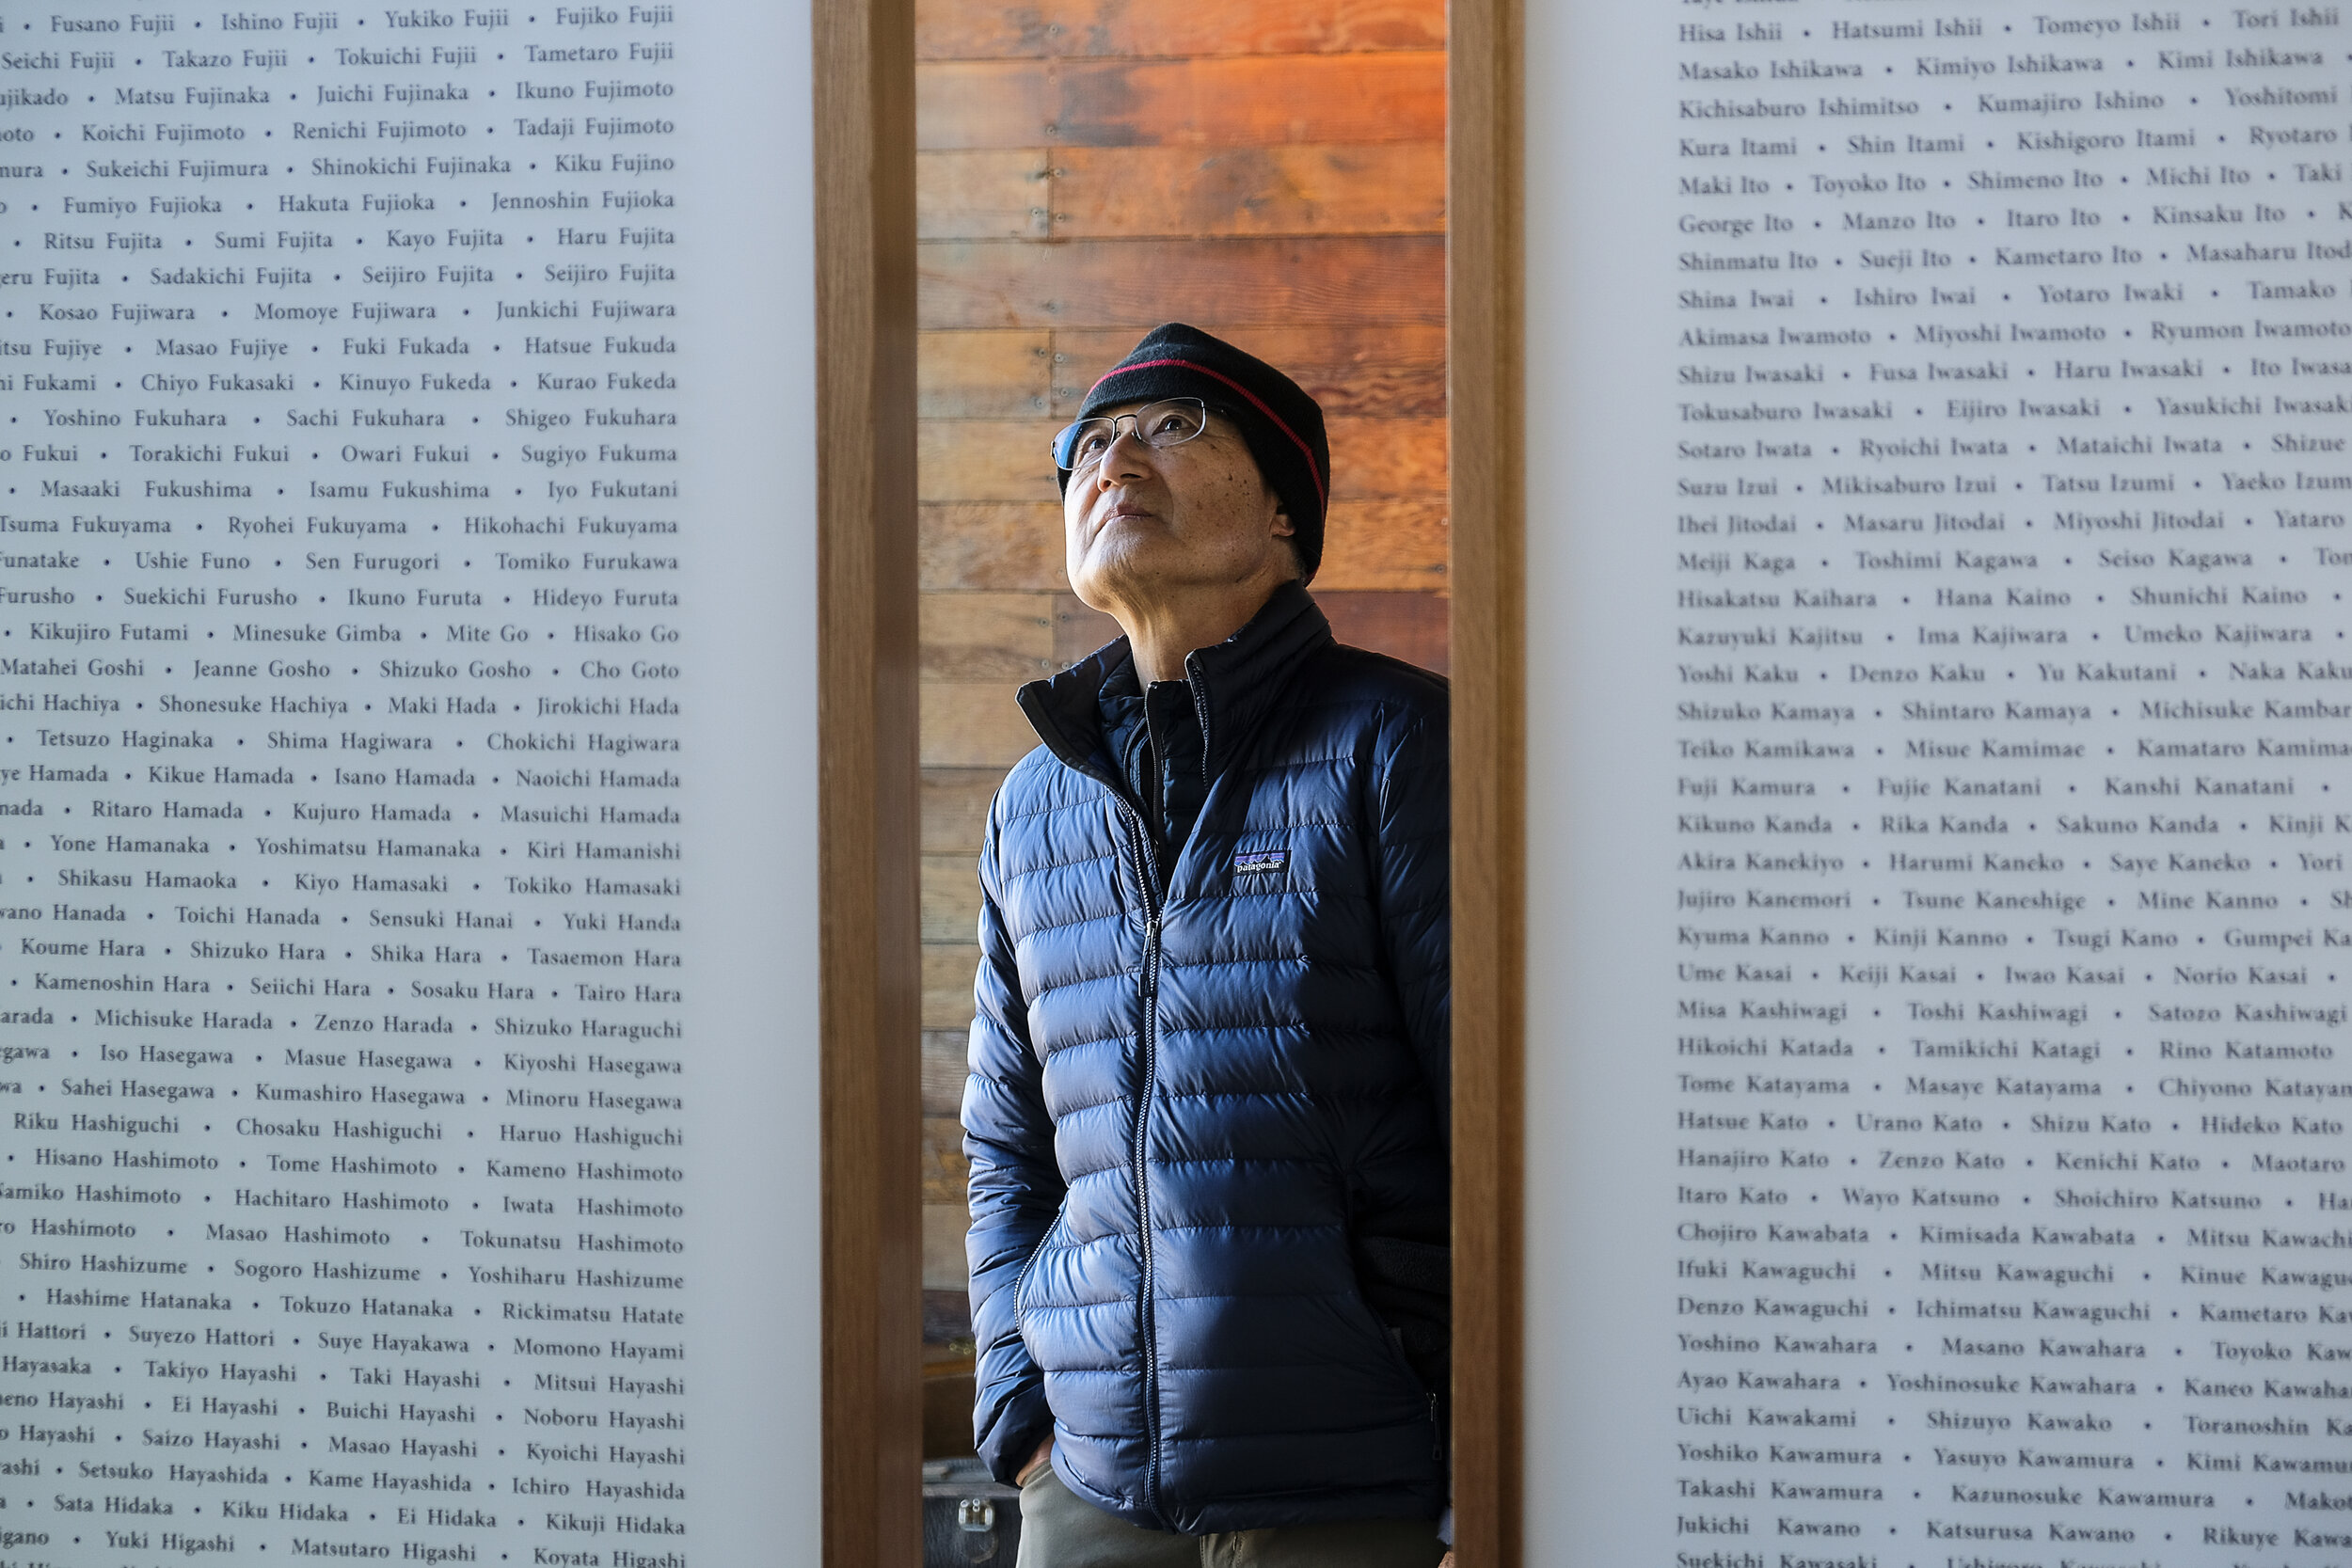 A man wearing a beanie and jacket looks up to read two large plaques filled with names.